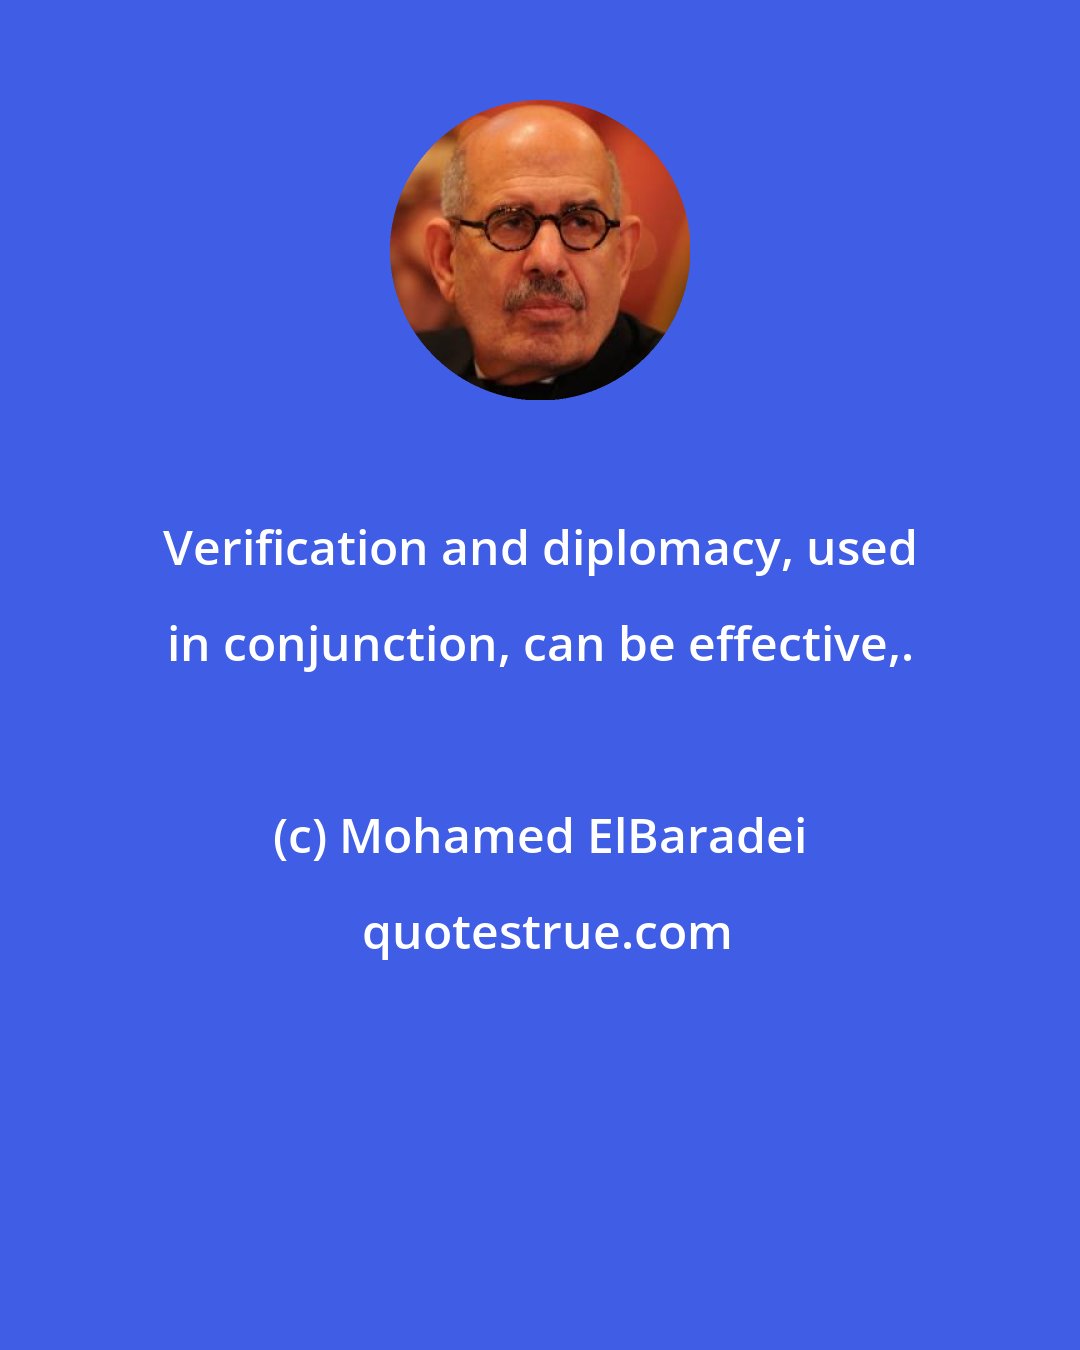 Mohamed ElBaradei: Verification and diplomacy, used in conjunction, can be effective,.